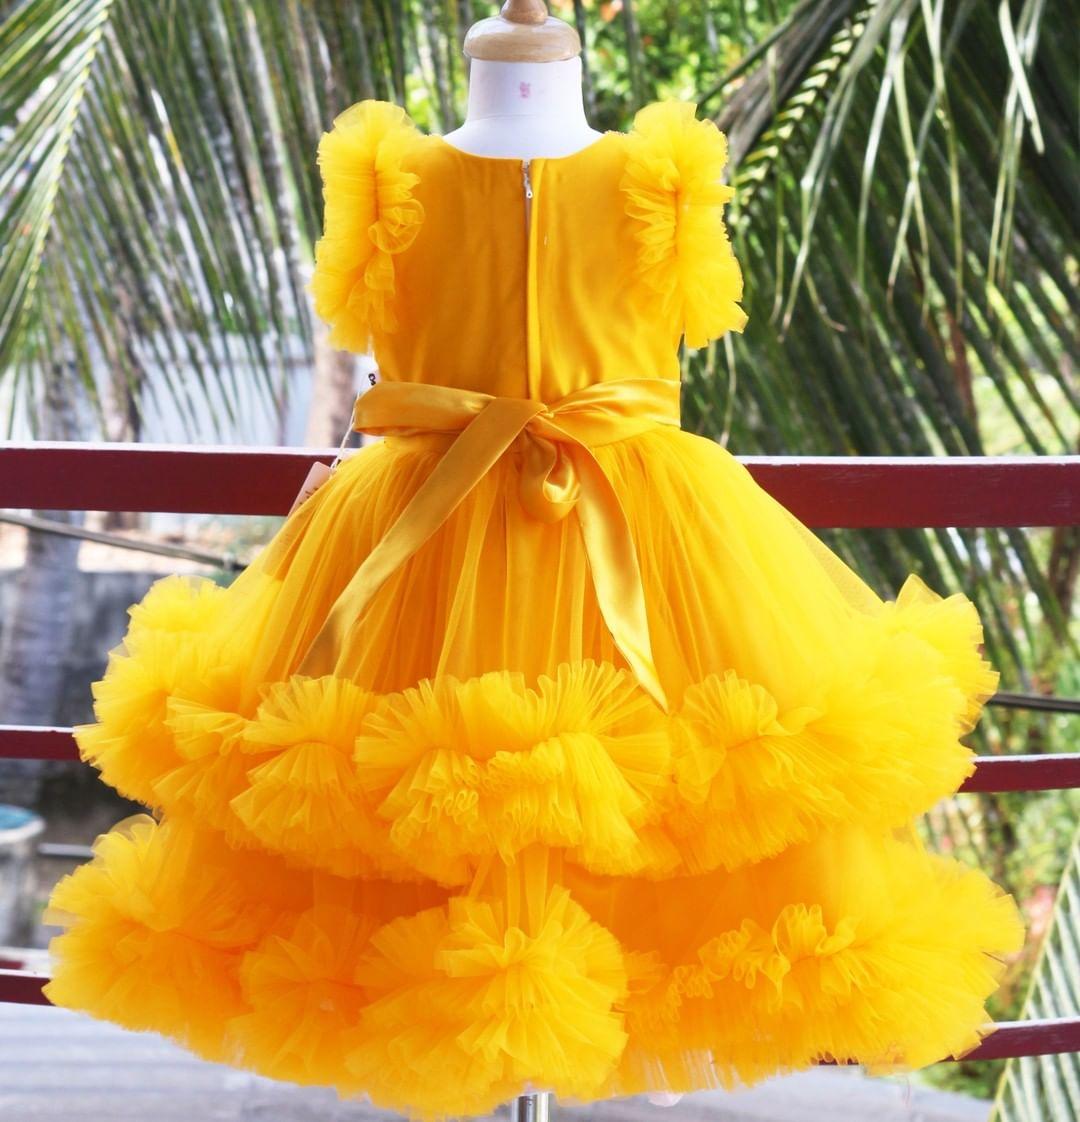 Mango Yellow Handwork Two Layer Ruffled Frock
Material: Mango Yellow  Shade Pleated Ruffled Frock mono net with layered and ruffles on the end portion. Yoke portion is designed with pleated pattern and golden b